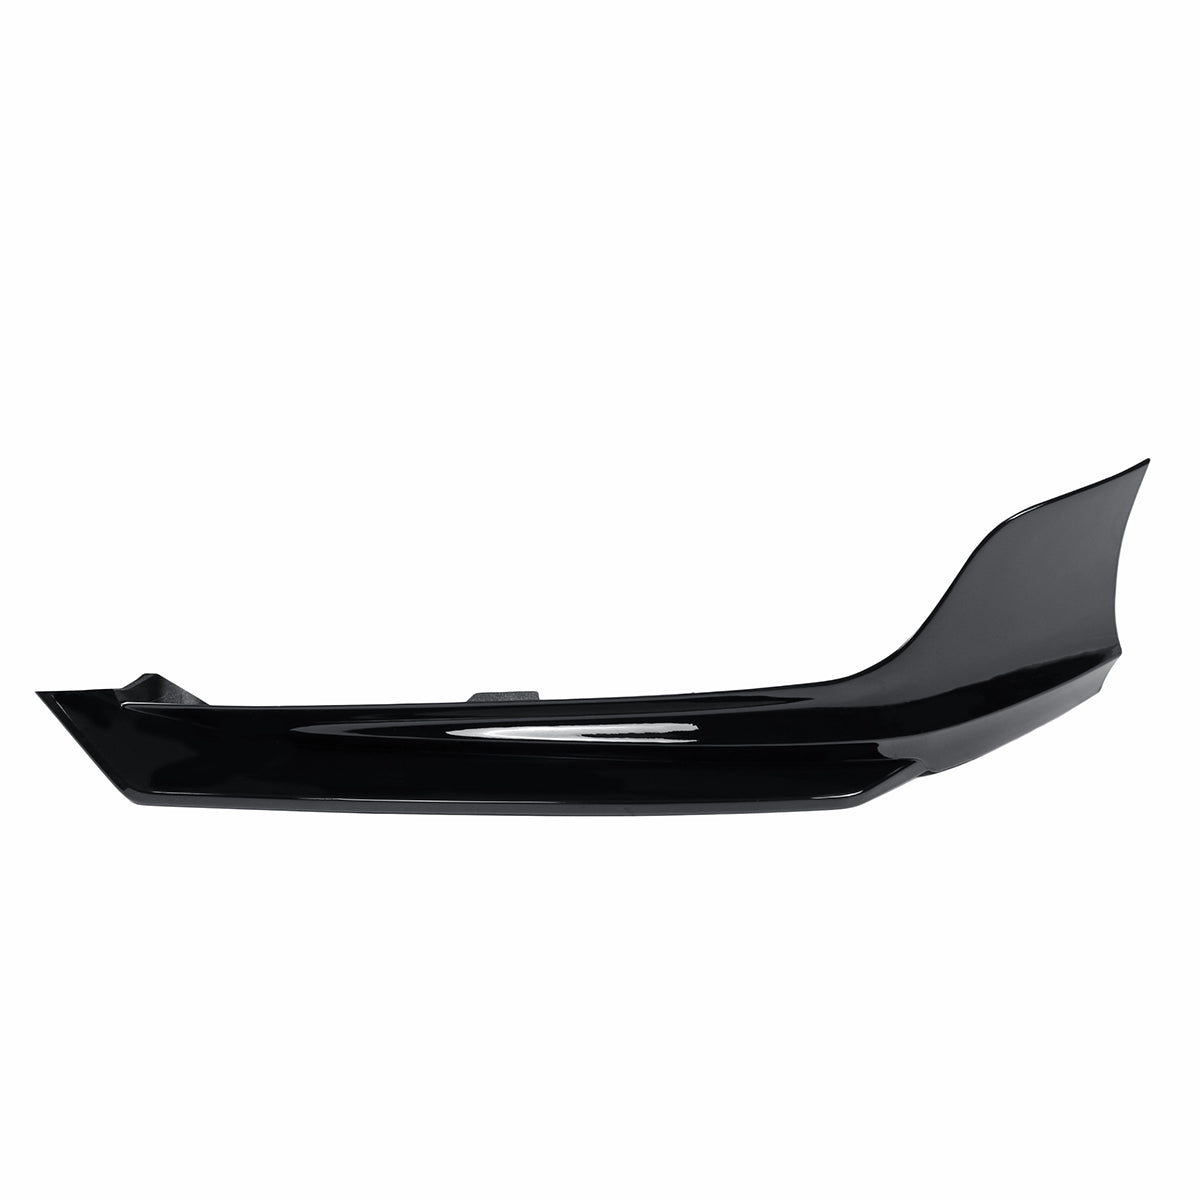 Painted Black Pearl Front Bumper Lip Protector Splitter Kit For ACCORD AKASAKA 2018-19 - Auto GoShop